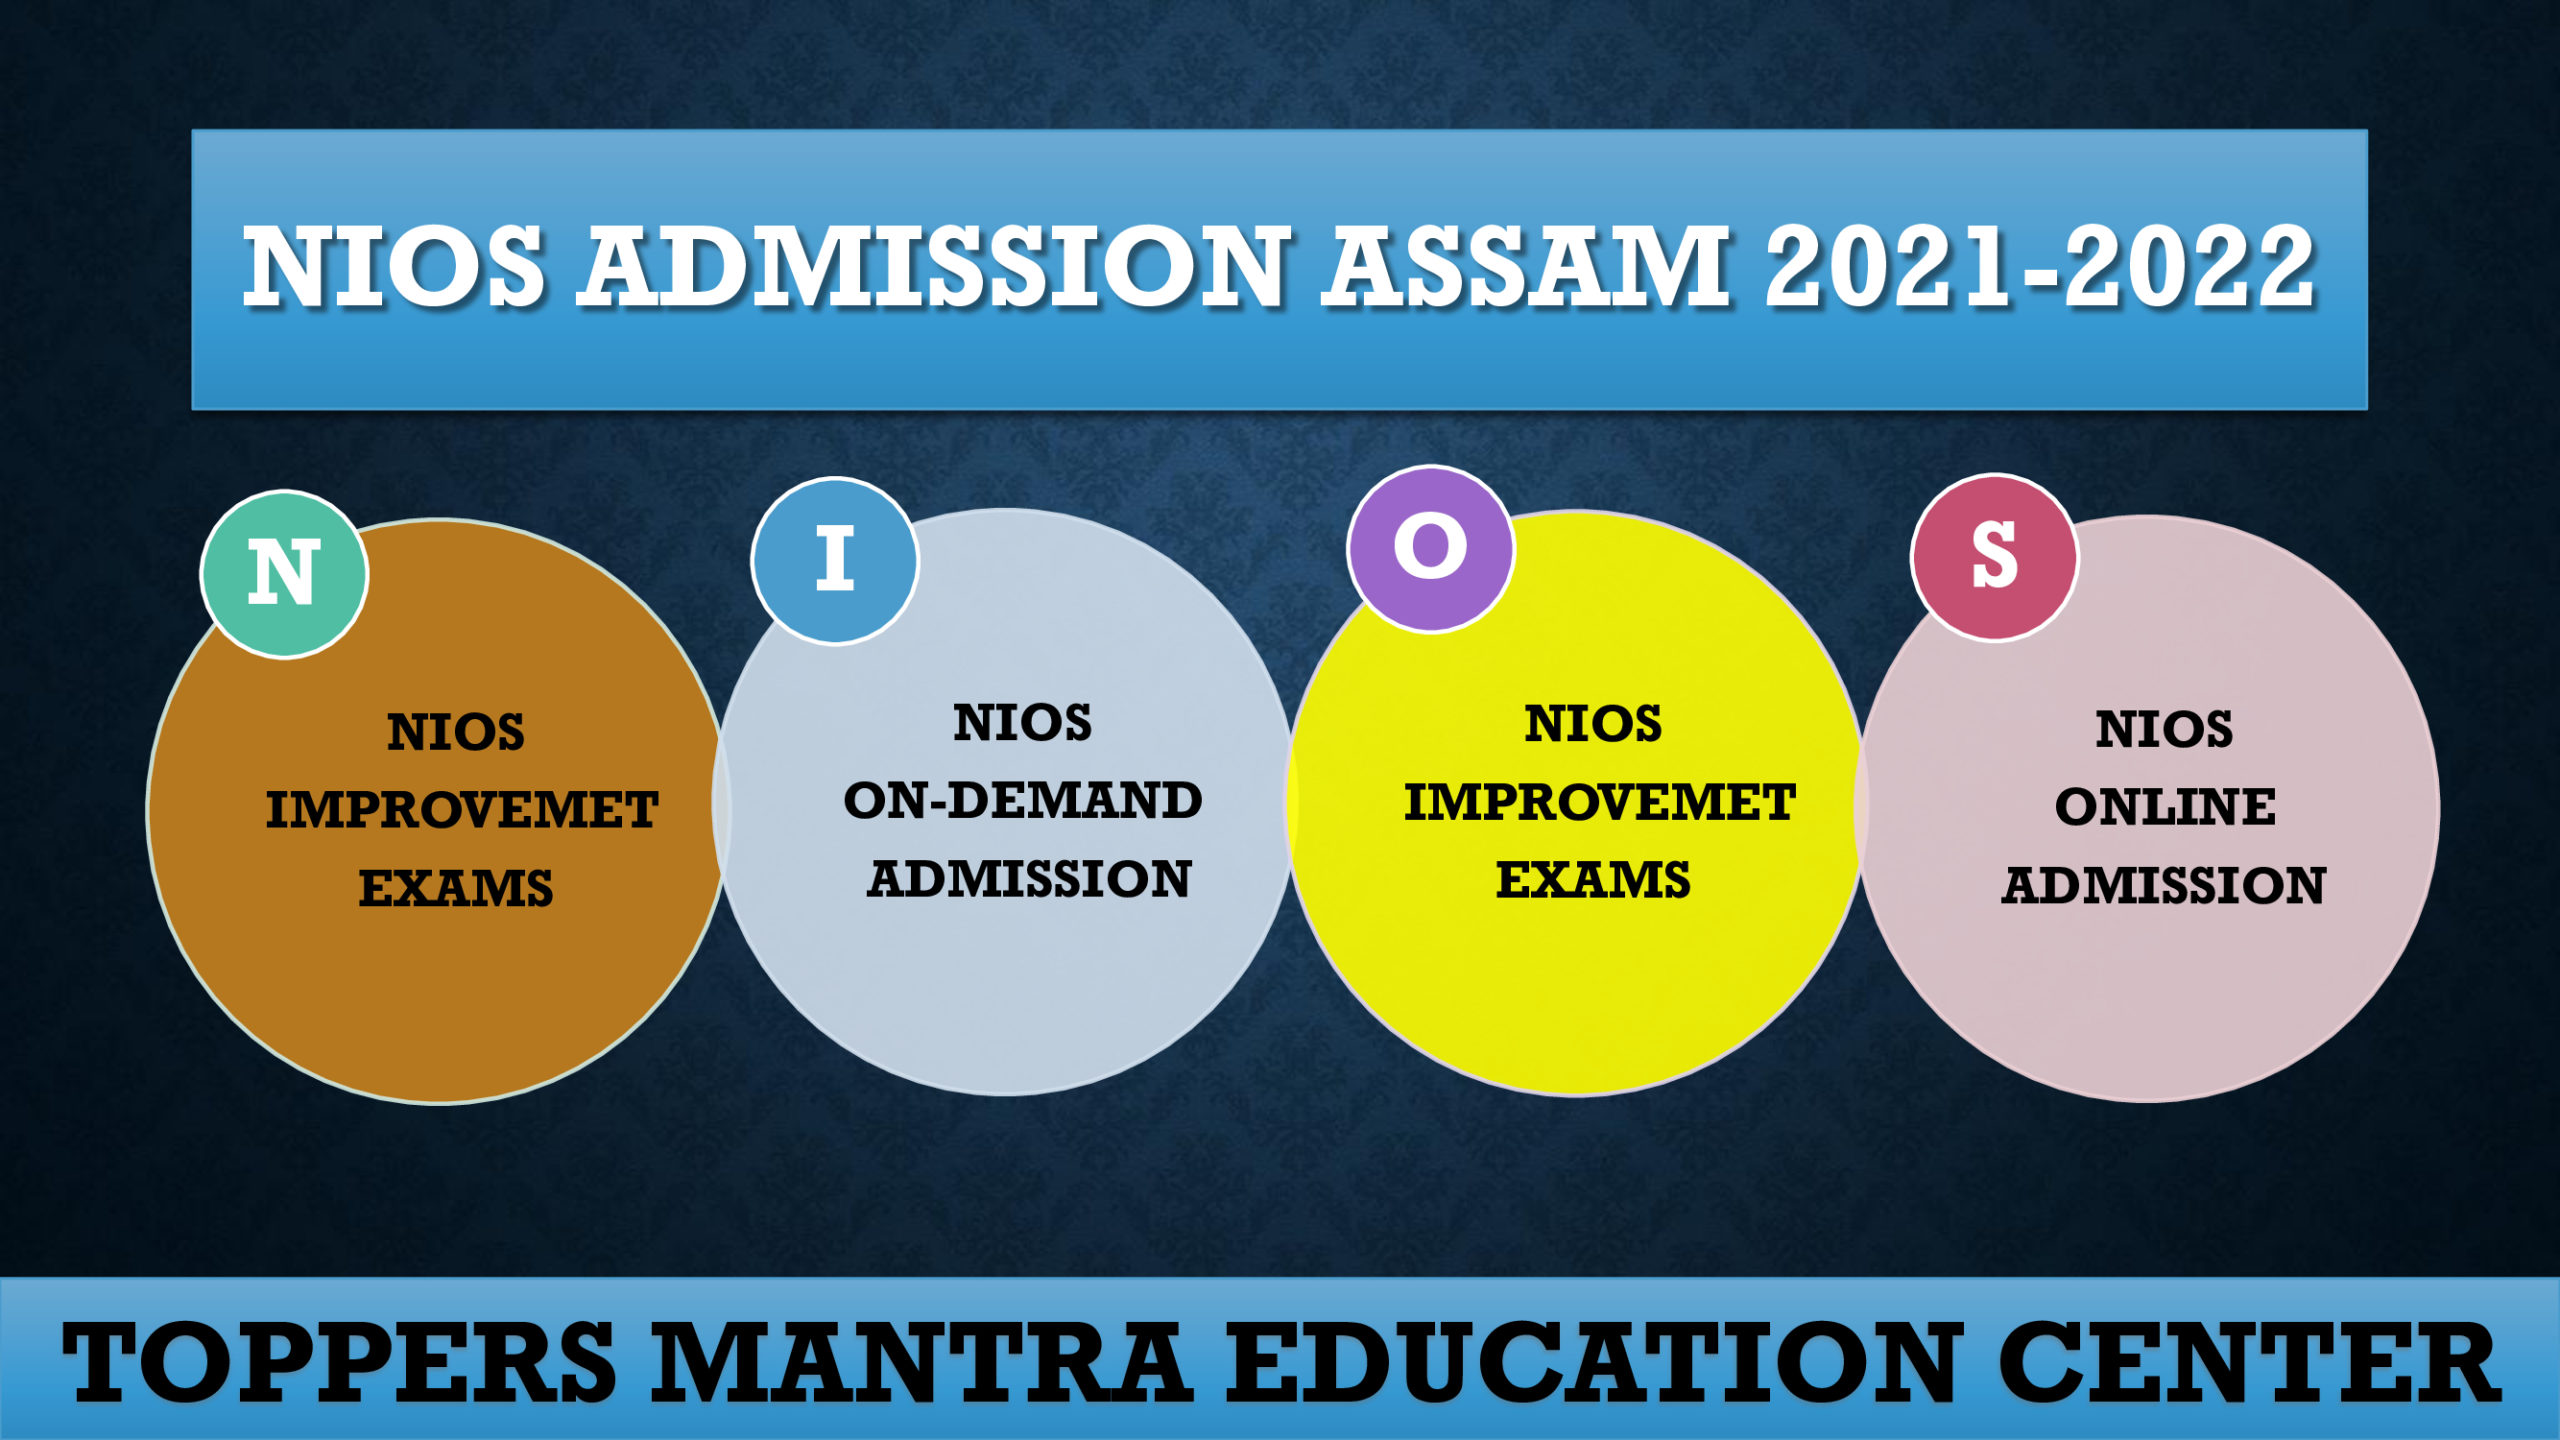 NIOS-ADMISSION-ASSAM-TOPPERS-MANTRA-EDUCATION-CENTER